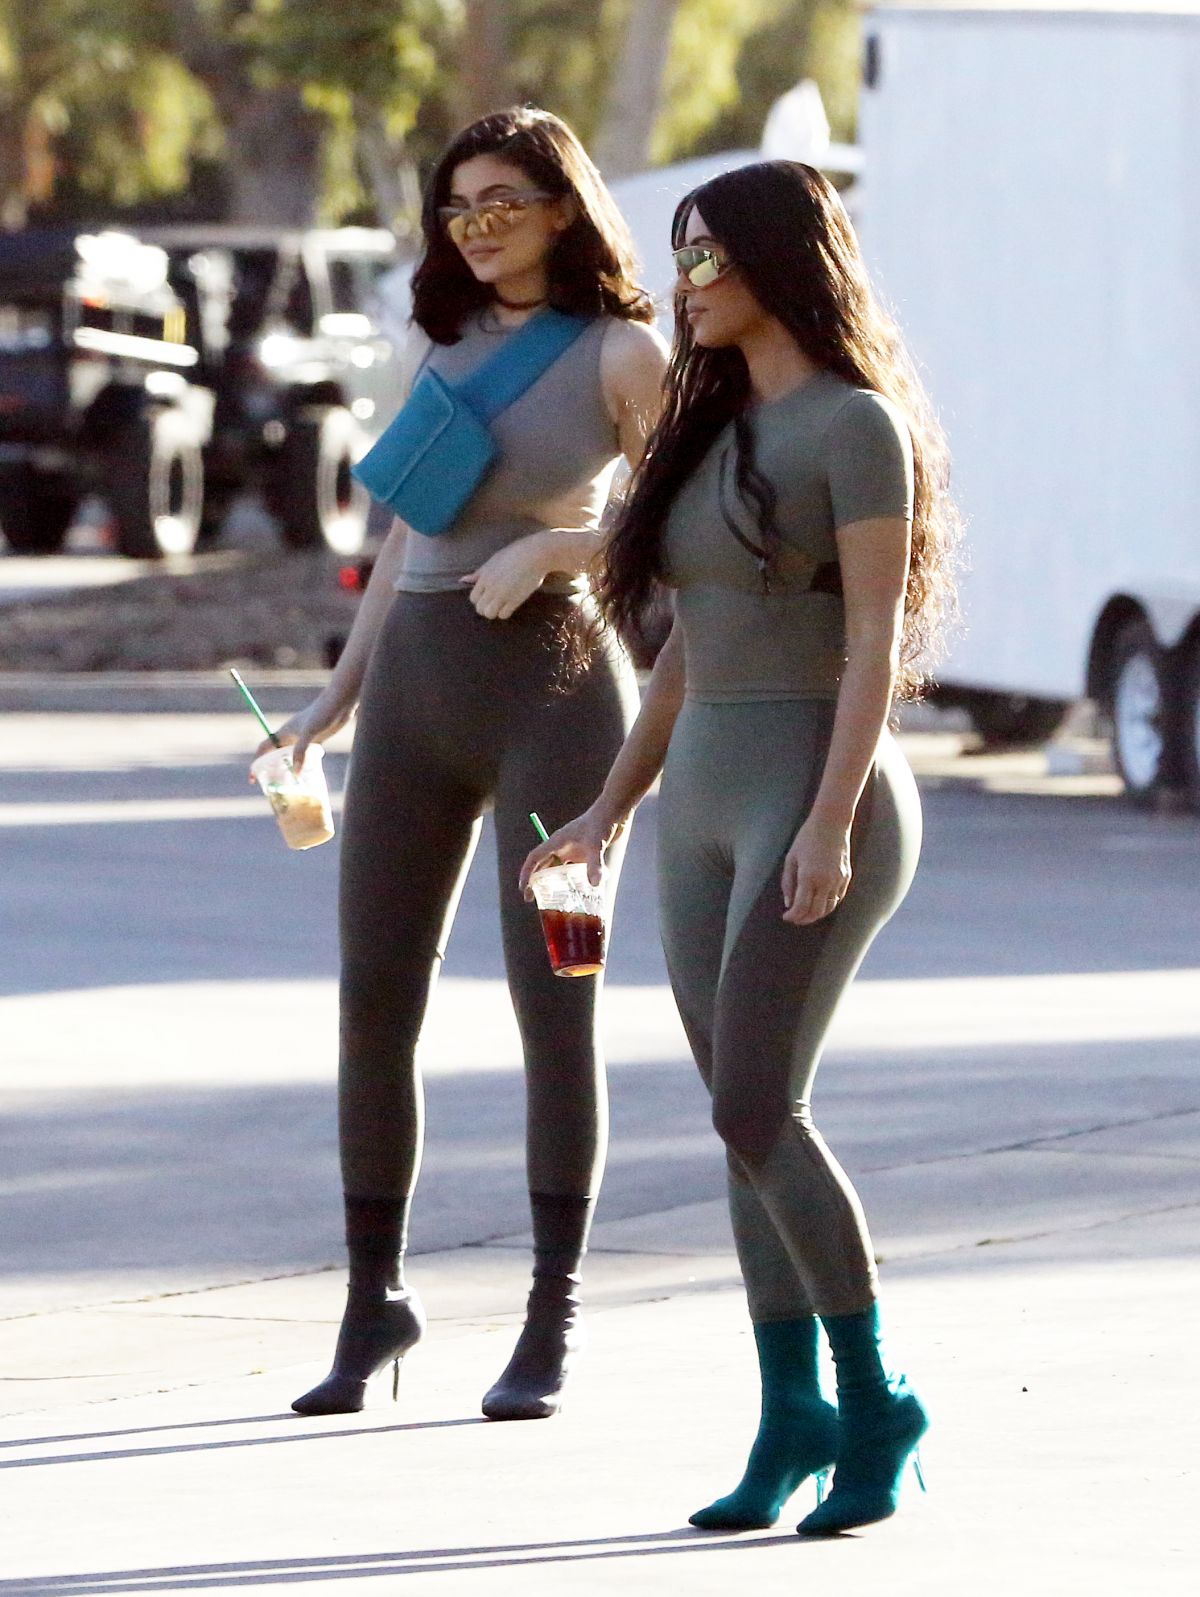 KIM KARDASHIAN and KYLIE JENNER in Tights Out in Calabasas 06/11/2018 ...